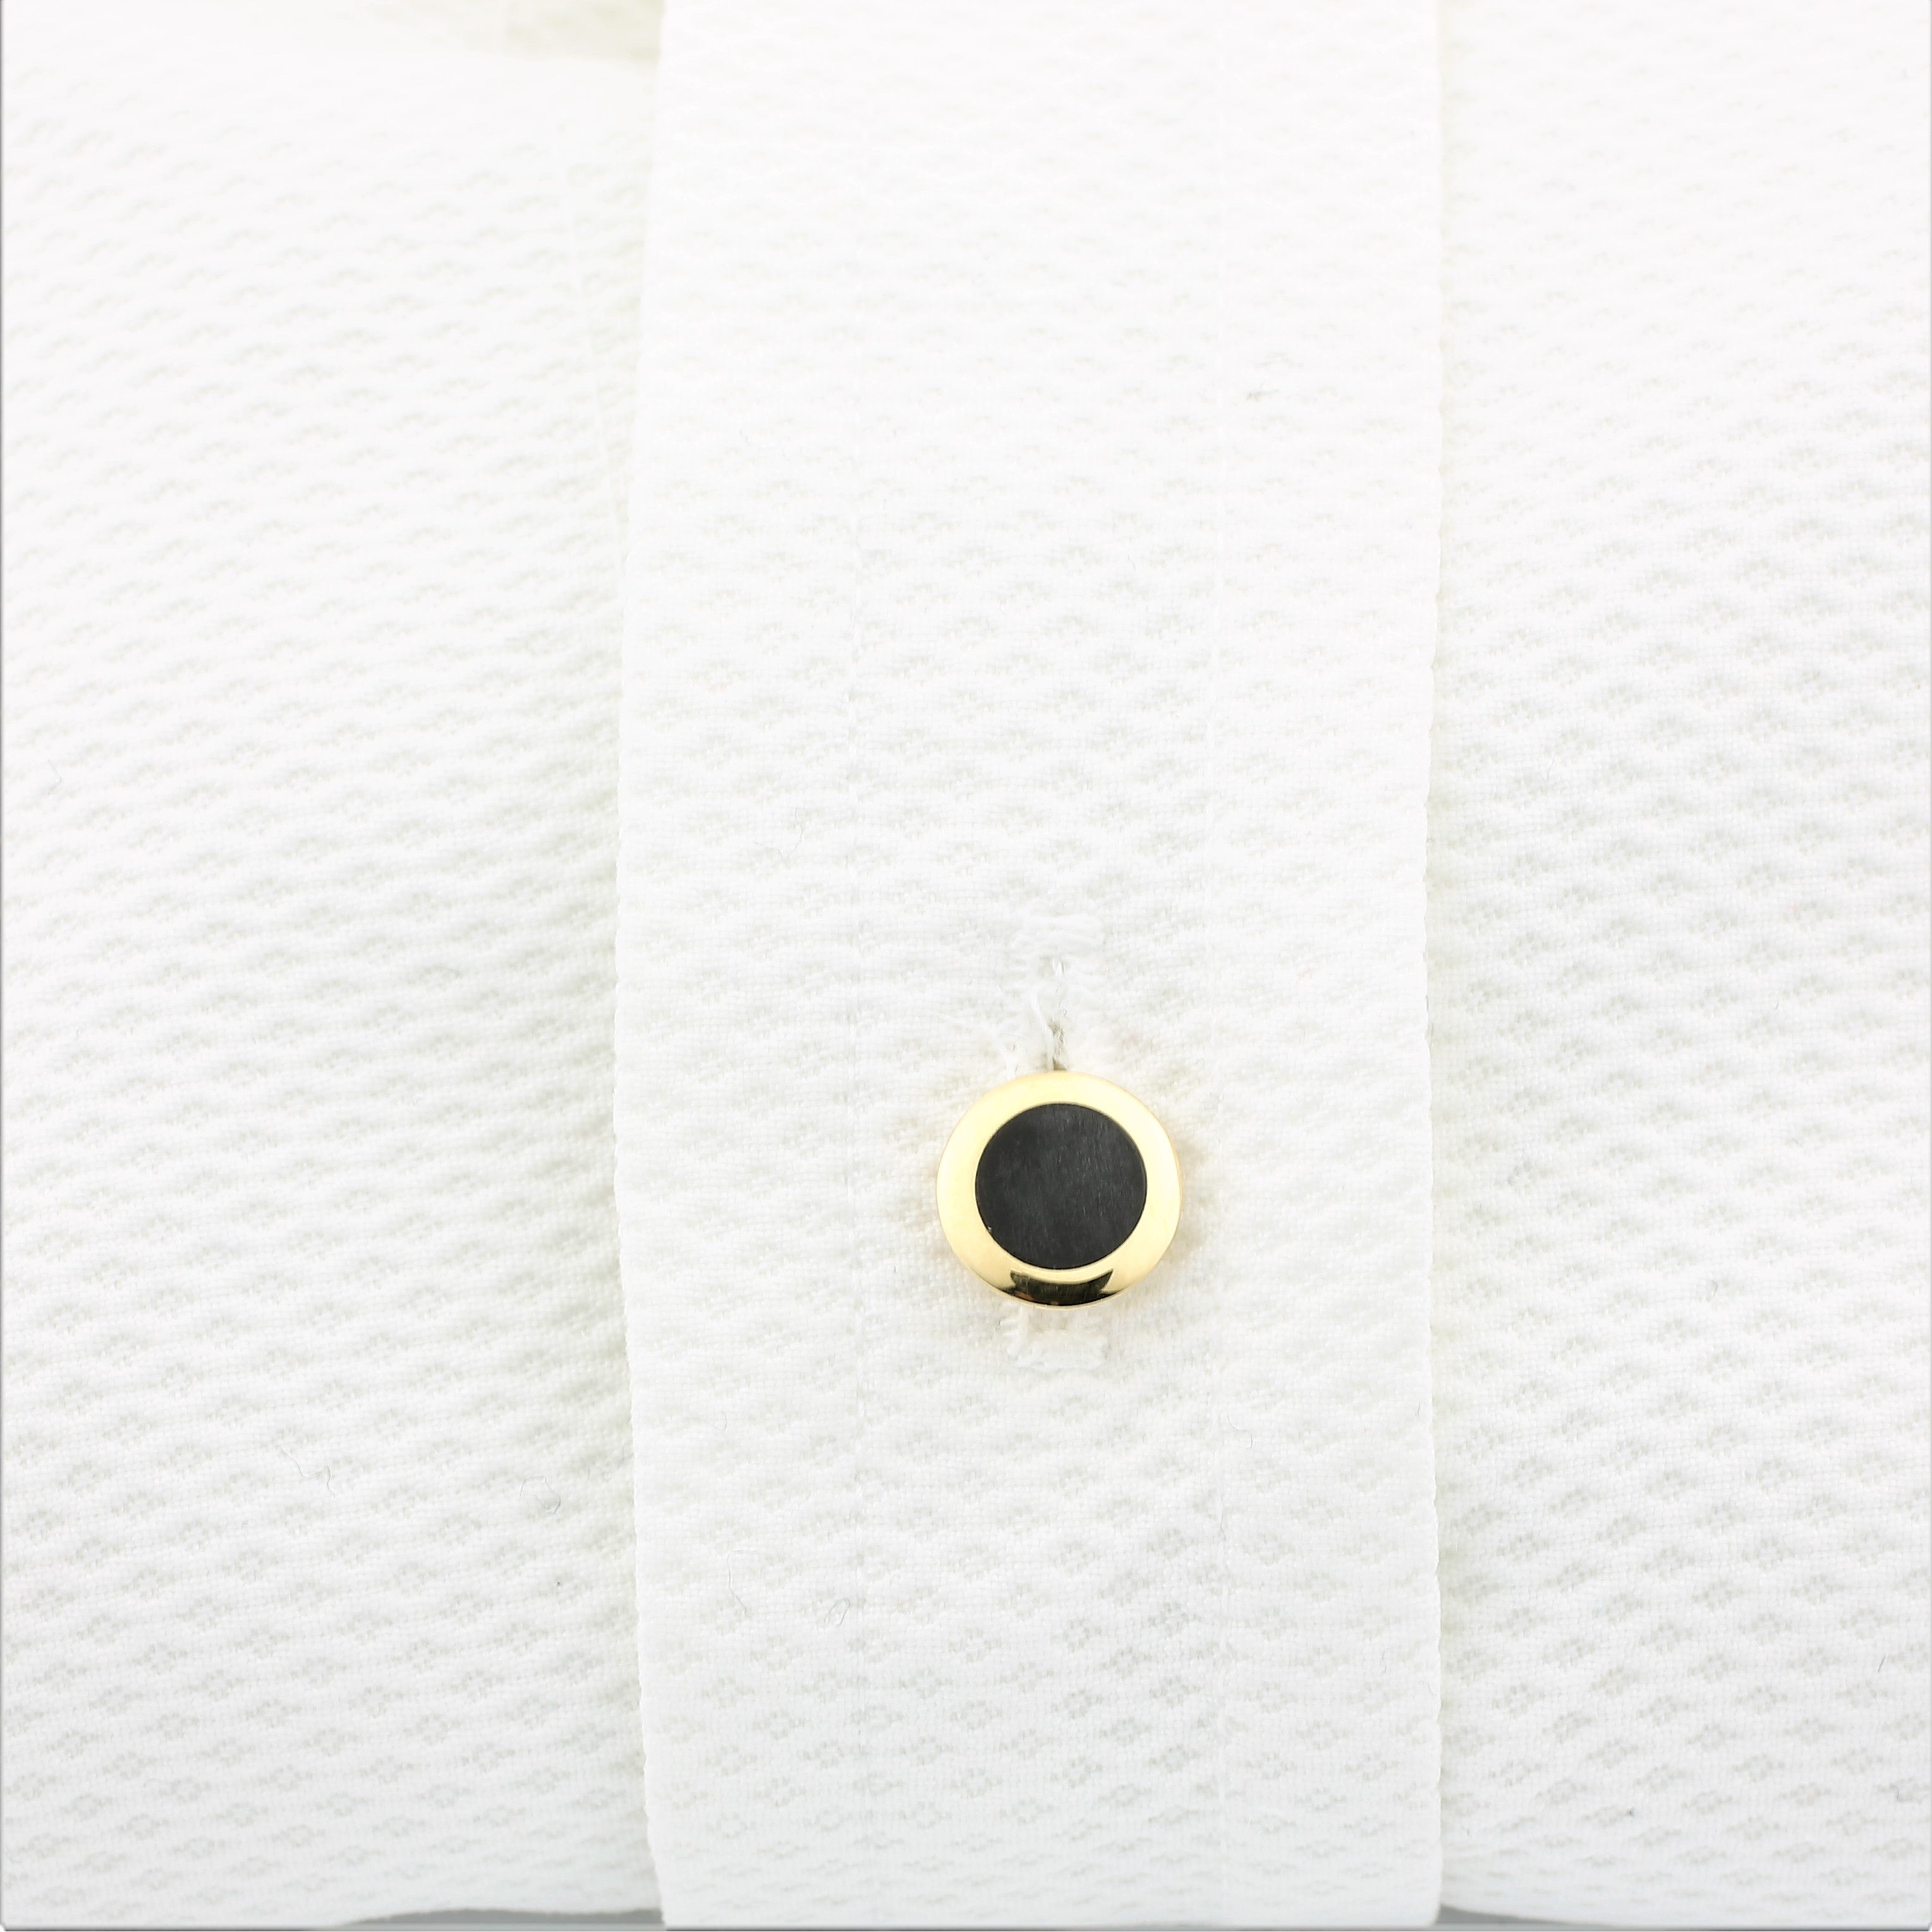 Onyx studs in 18k yellow gold in a shirt